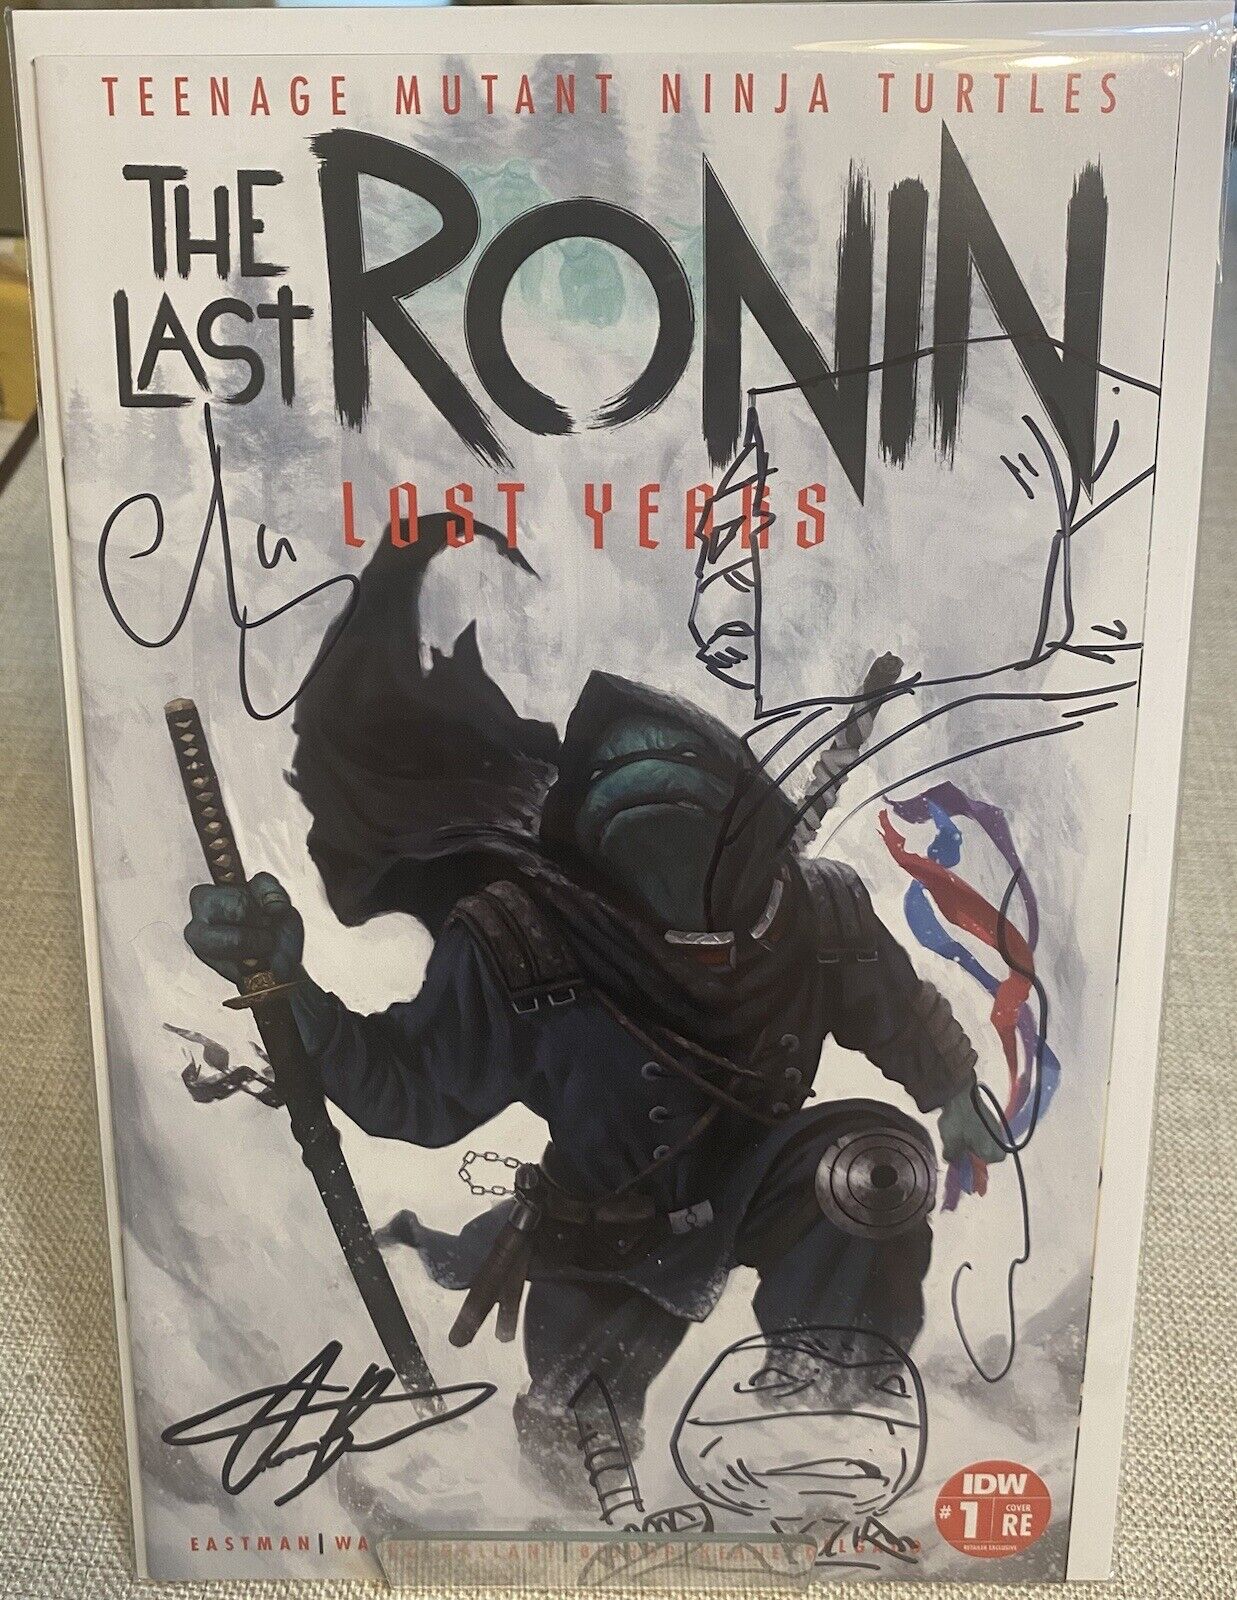 TMNT The Last Ronin The Lost Years #1 Trade Variant 3x SIGNED And 2x REMARQUED